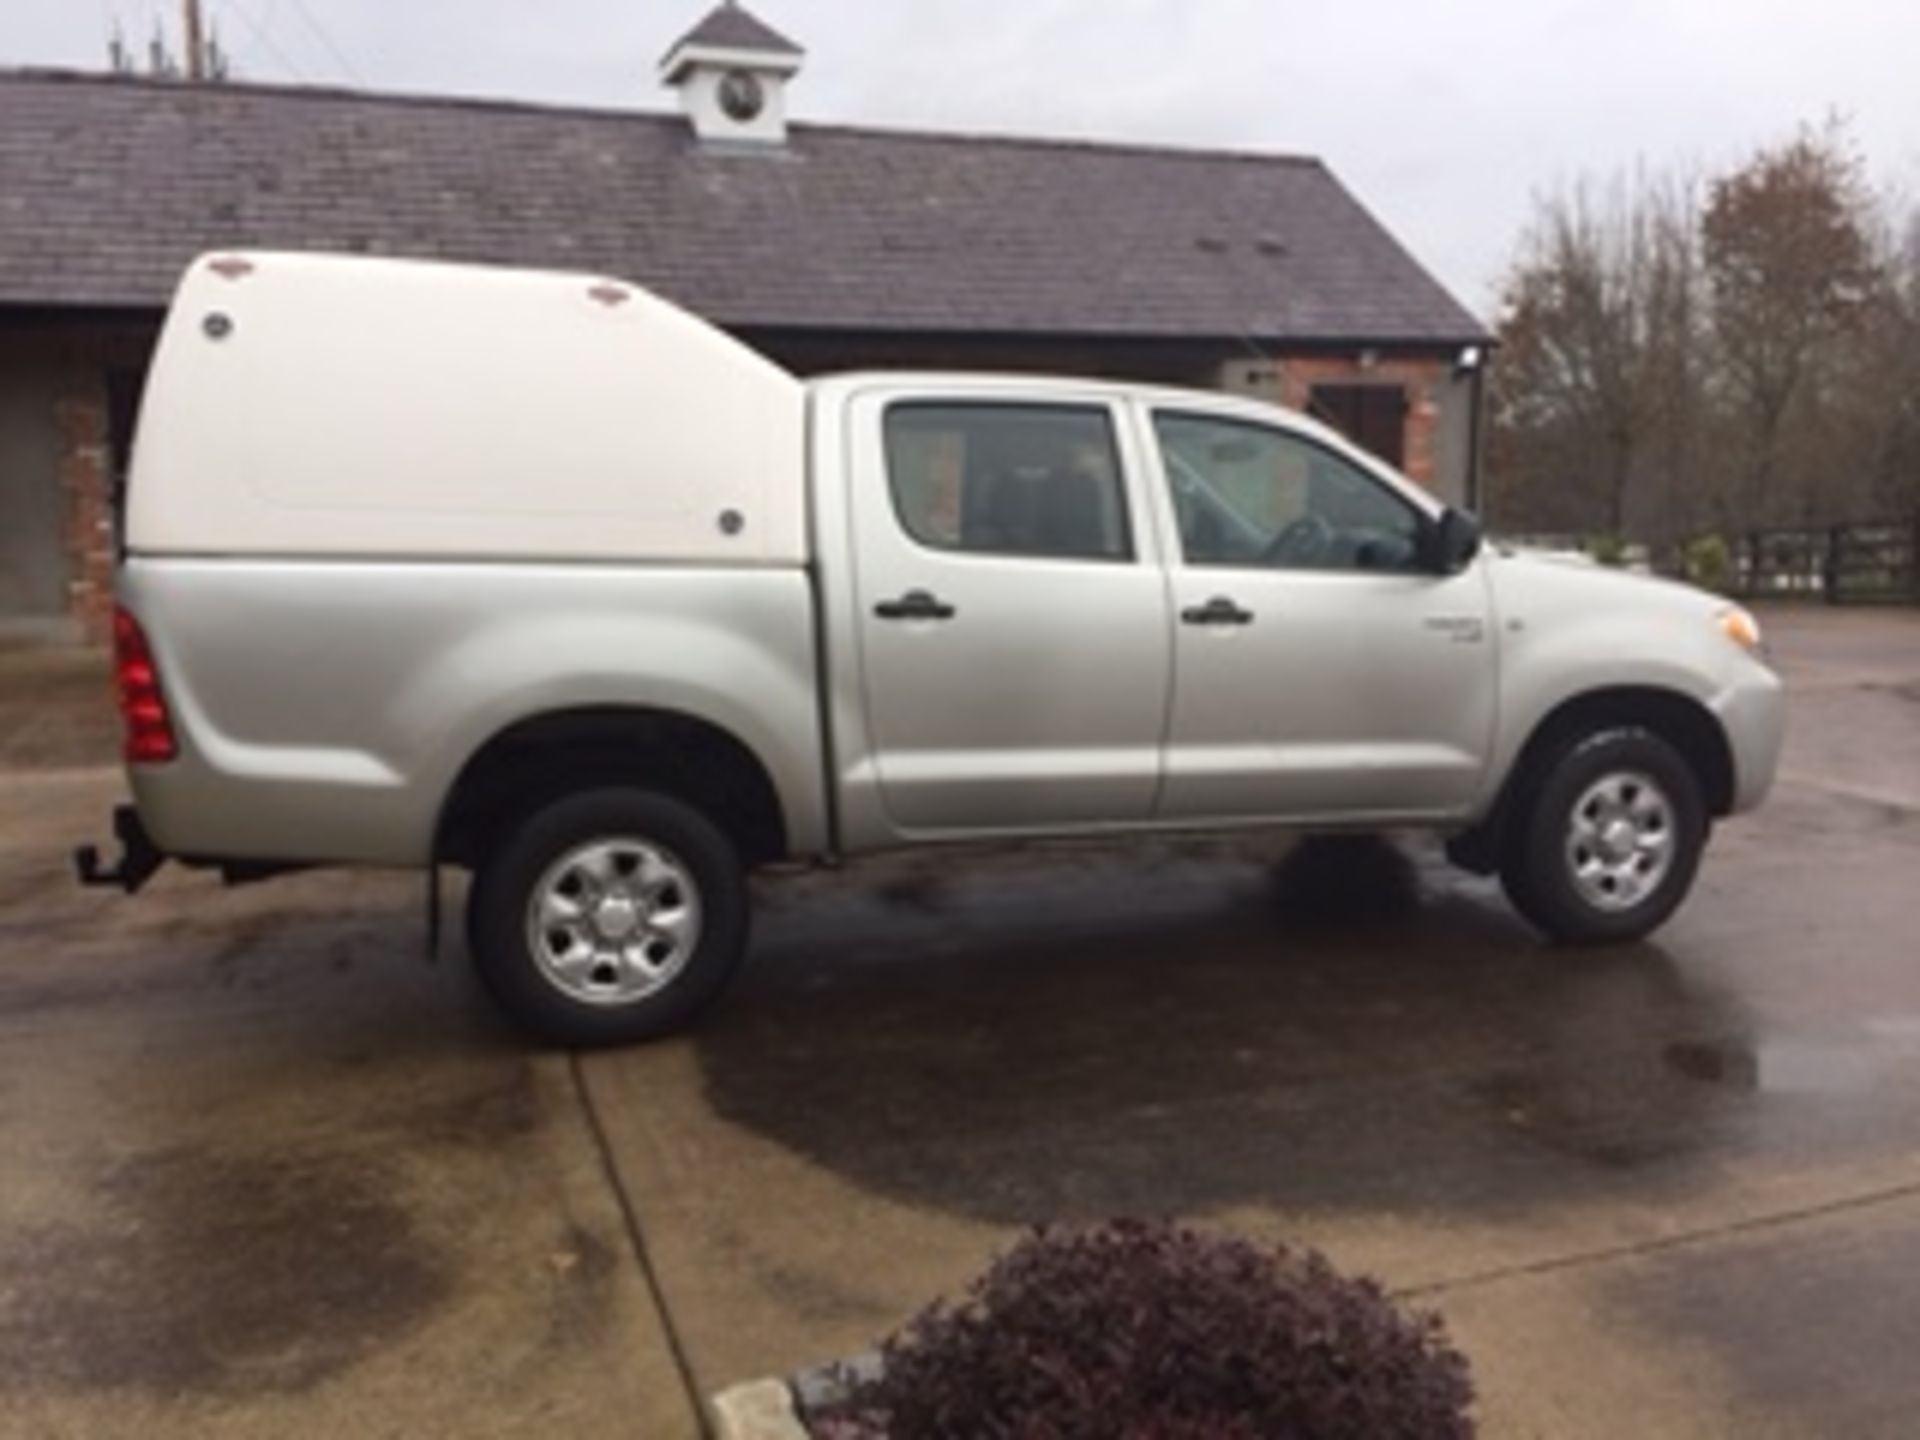 2008 (Feb) Toyota Hilux Double Cab Pickup c/w Canopy, 63000 miles Reg - CGZ 2727 - Image 3 of 6